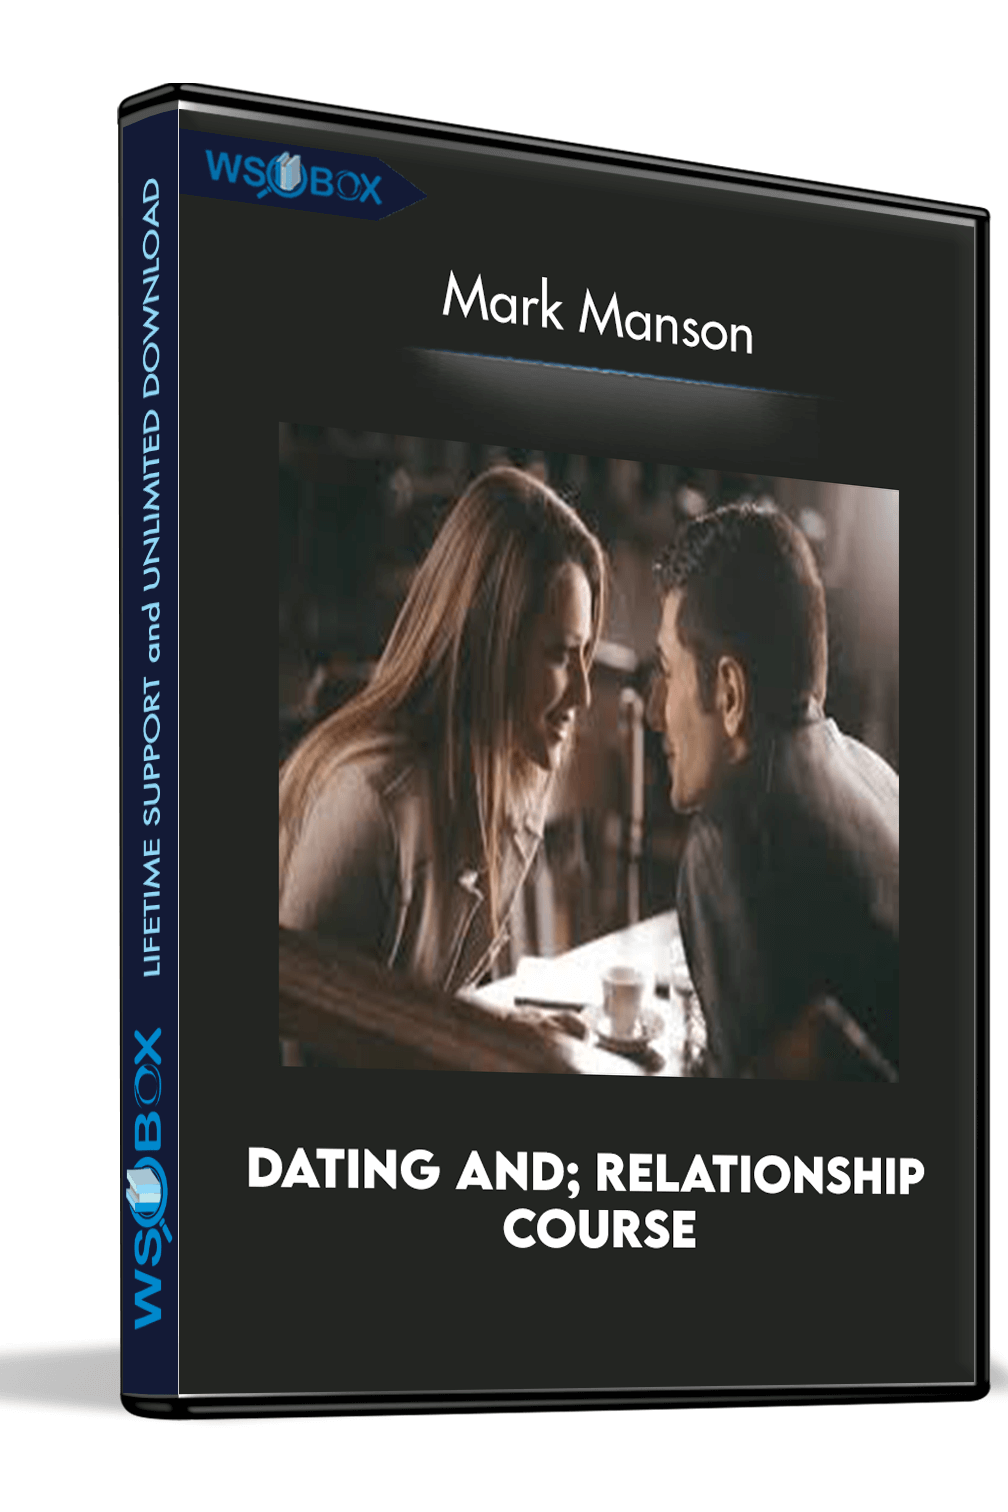 dating-relationship-course-mark-manson